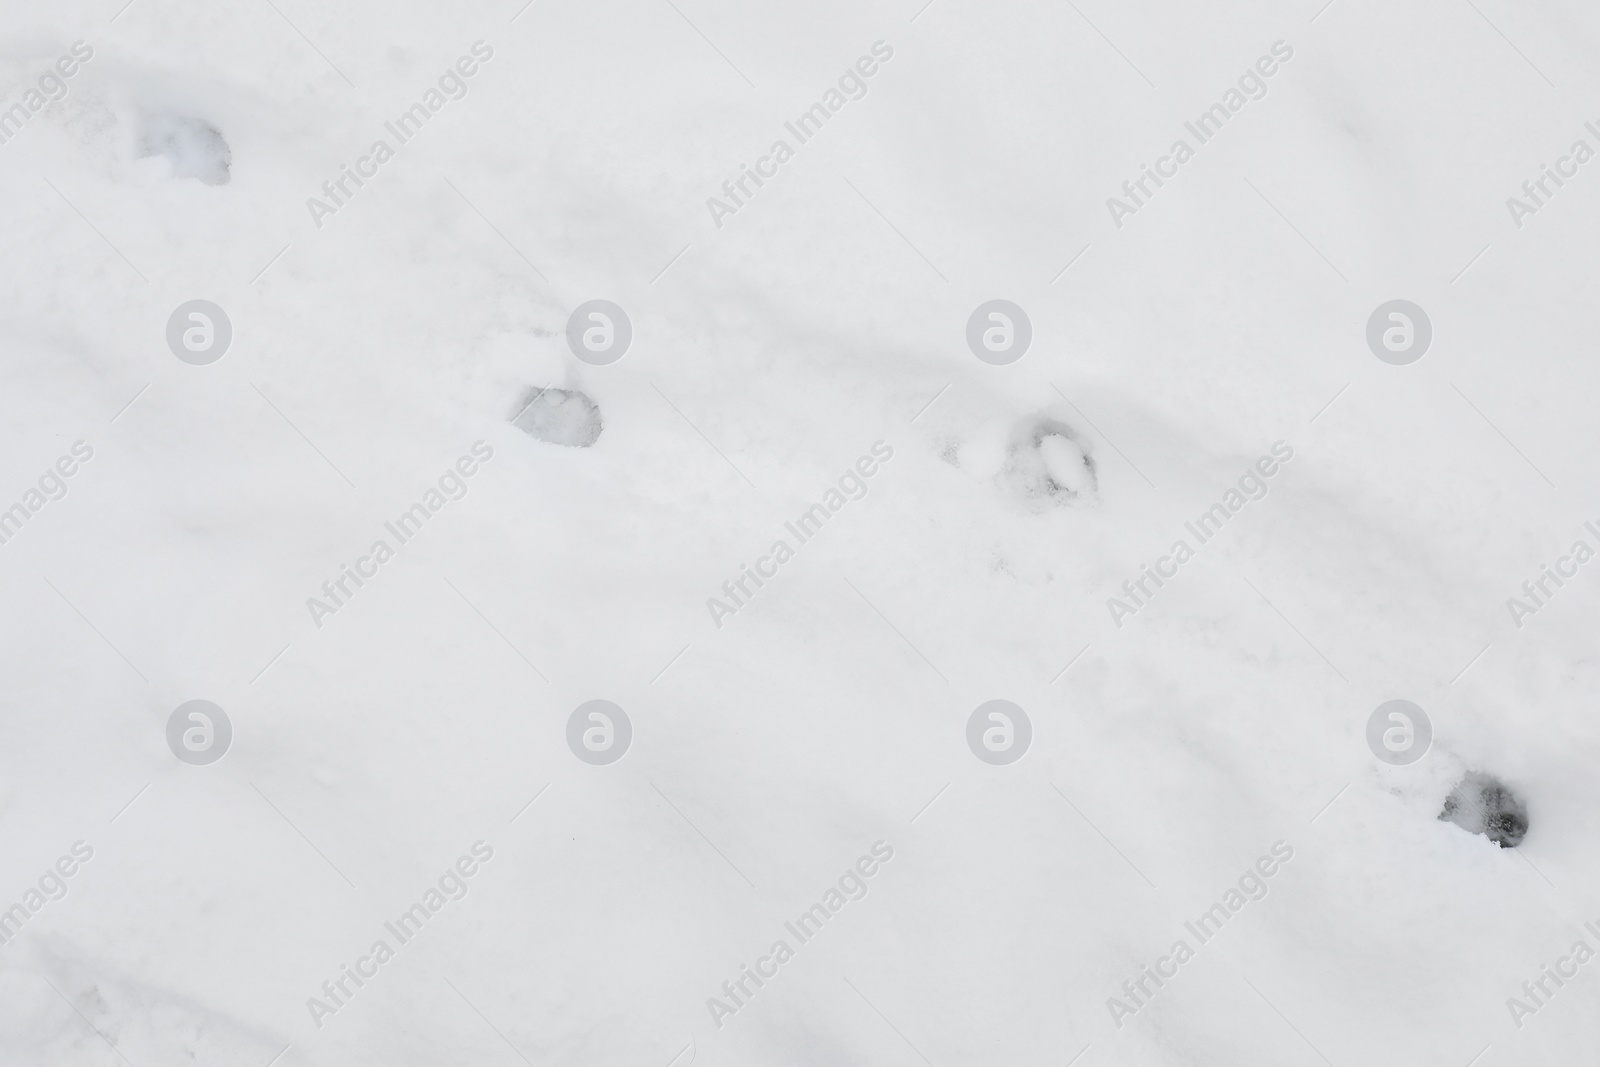 Photo of Animal trails on snow outdoors, top view